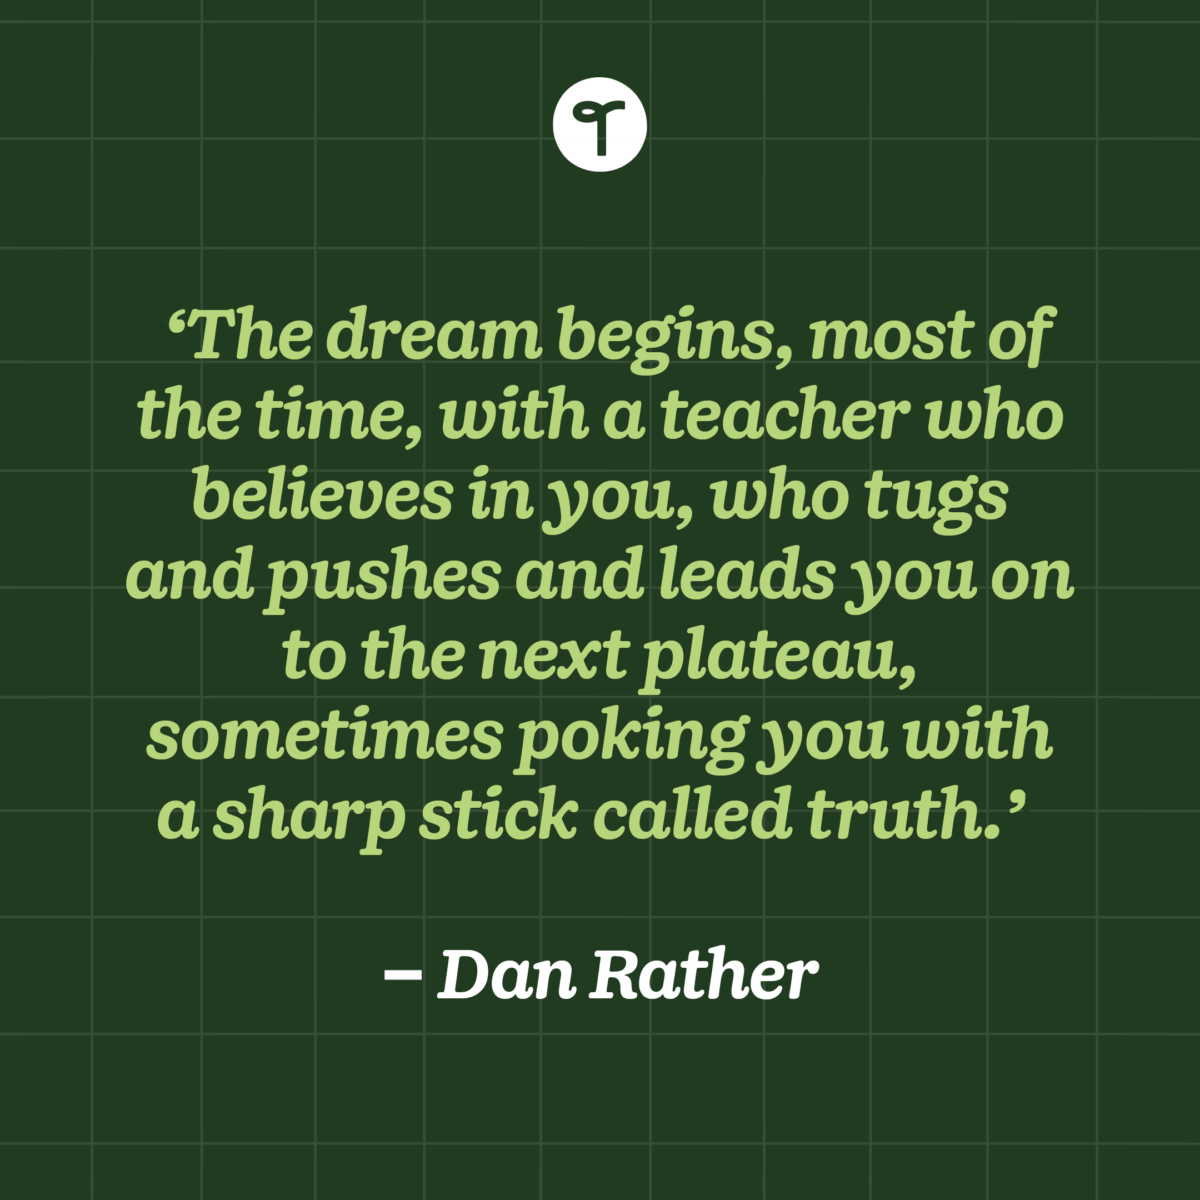 'The dream begins, most of the time, with a teacher who believes in you, who tugs and pushes and leads you on to the next plateau, sometimes poking you with a sharp stick called truth.' — Dan Rather written on a green background